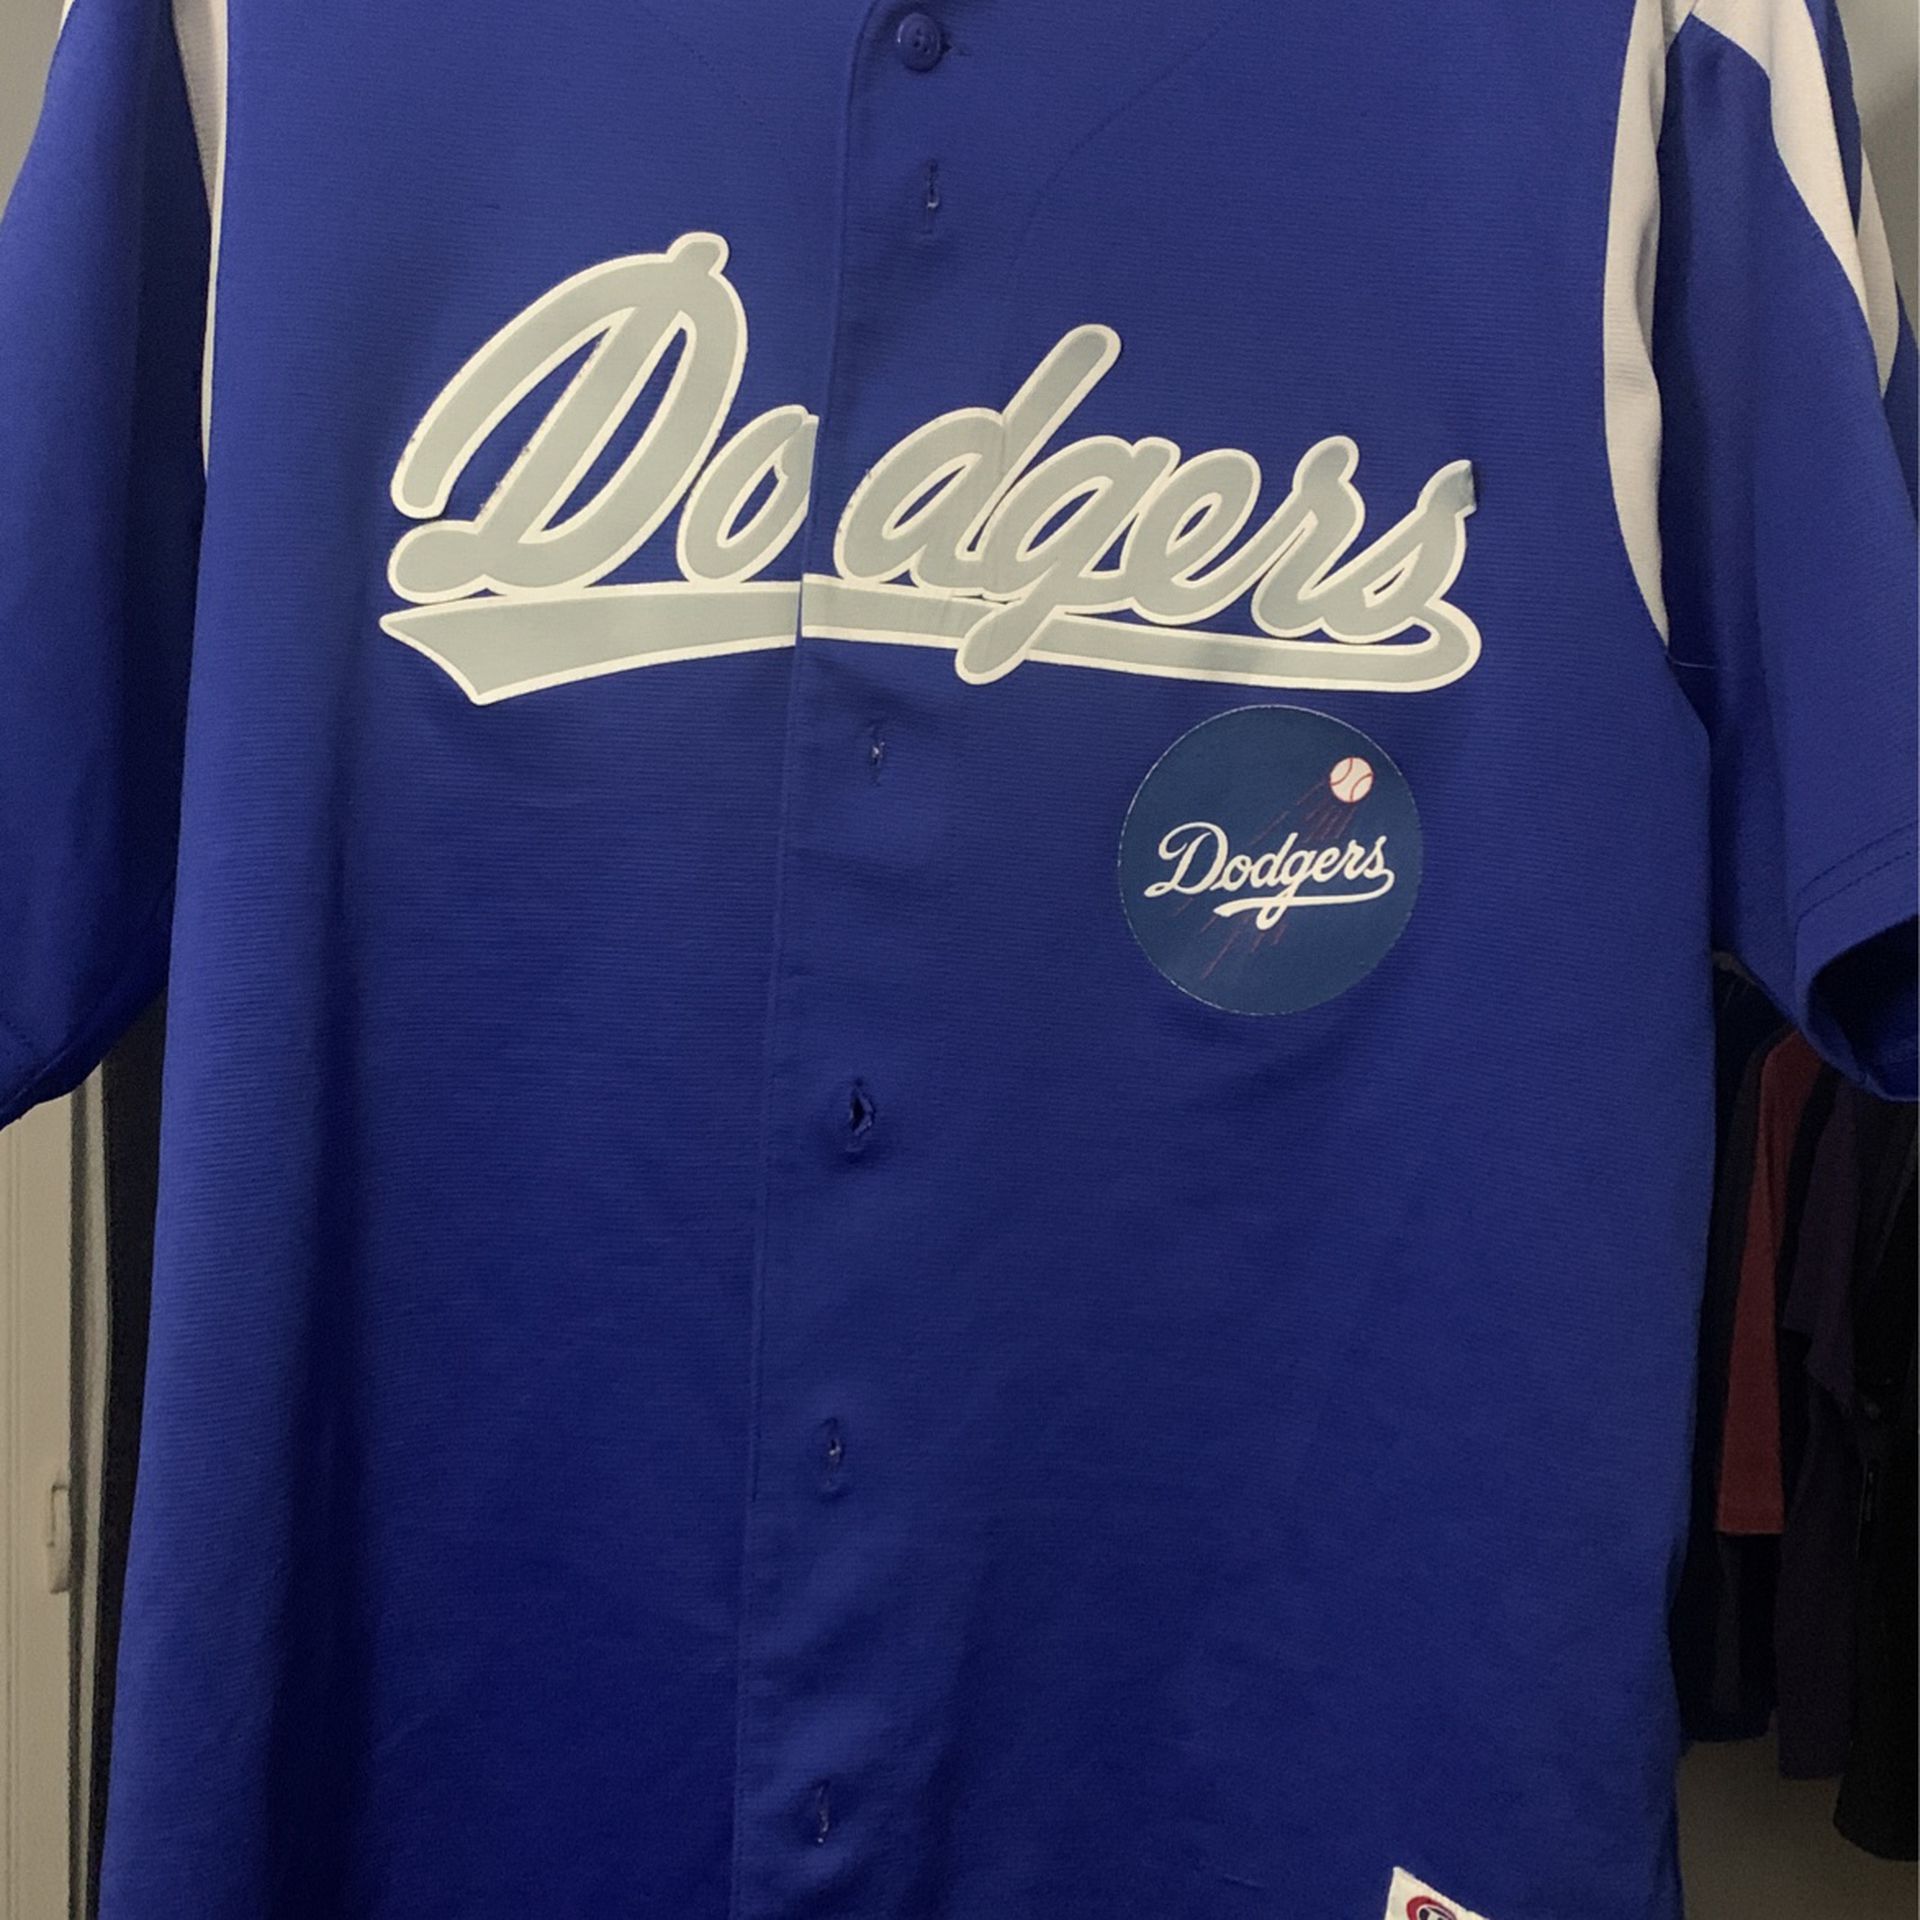 Los Angeles Dodgers Jersey Mens Large for Sale in Brea, CA - OfferUp